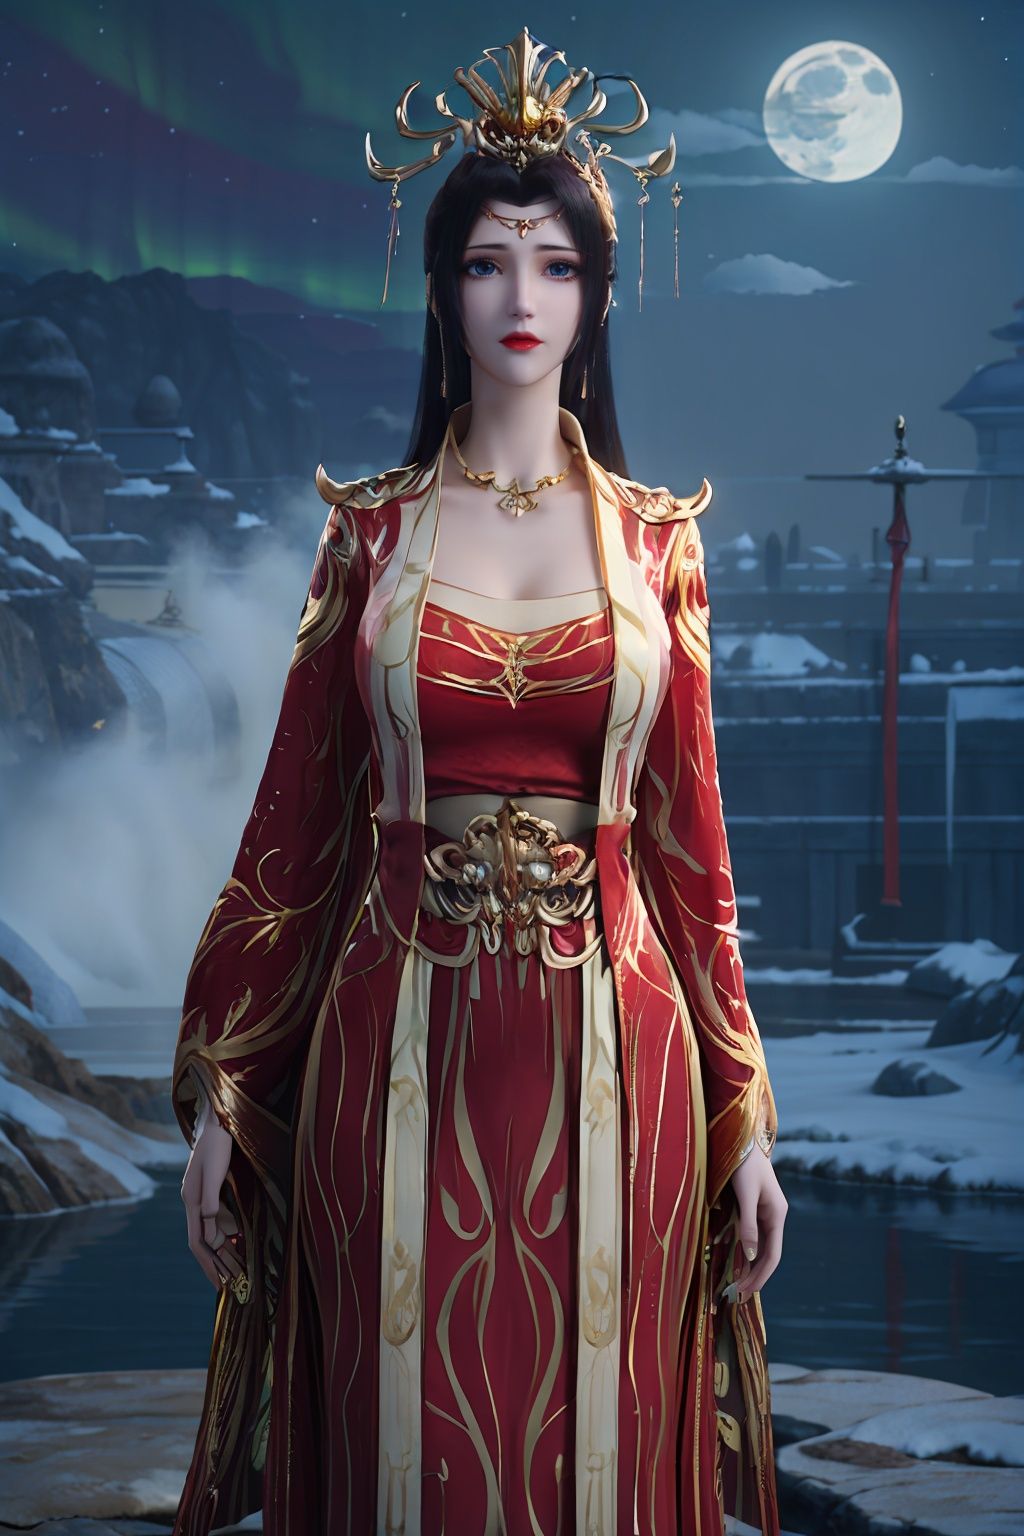 masterpiece, best quality, silk stockings, huge breasts, narrow waist, delicate face, put on makeup, (clouds, starry sky, aurora, moon:1.3), white skin, (sapphire like eyes:1.2), sapphire, (wild, water, forest), gold, diamond, waterfall landscape background, (red tang dynasty clothing, red wedding dress, gold jewelry), high heels, <lora:《斗破苍穹》云韵（婚衣）_v1.0:0.75>, 